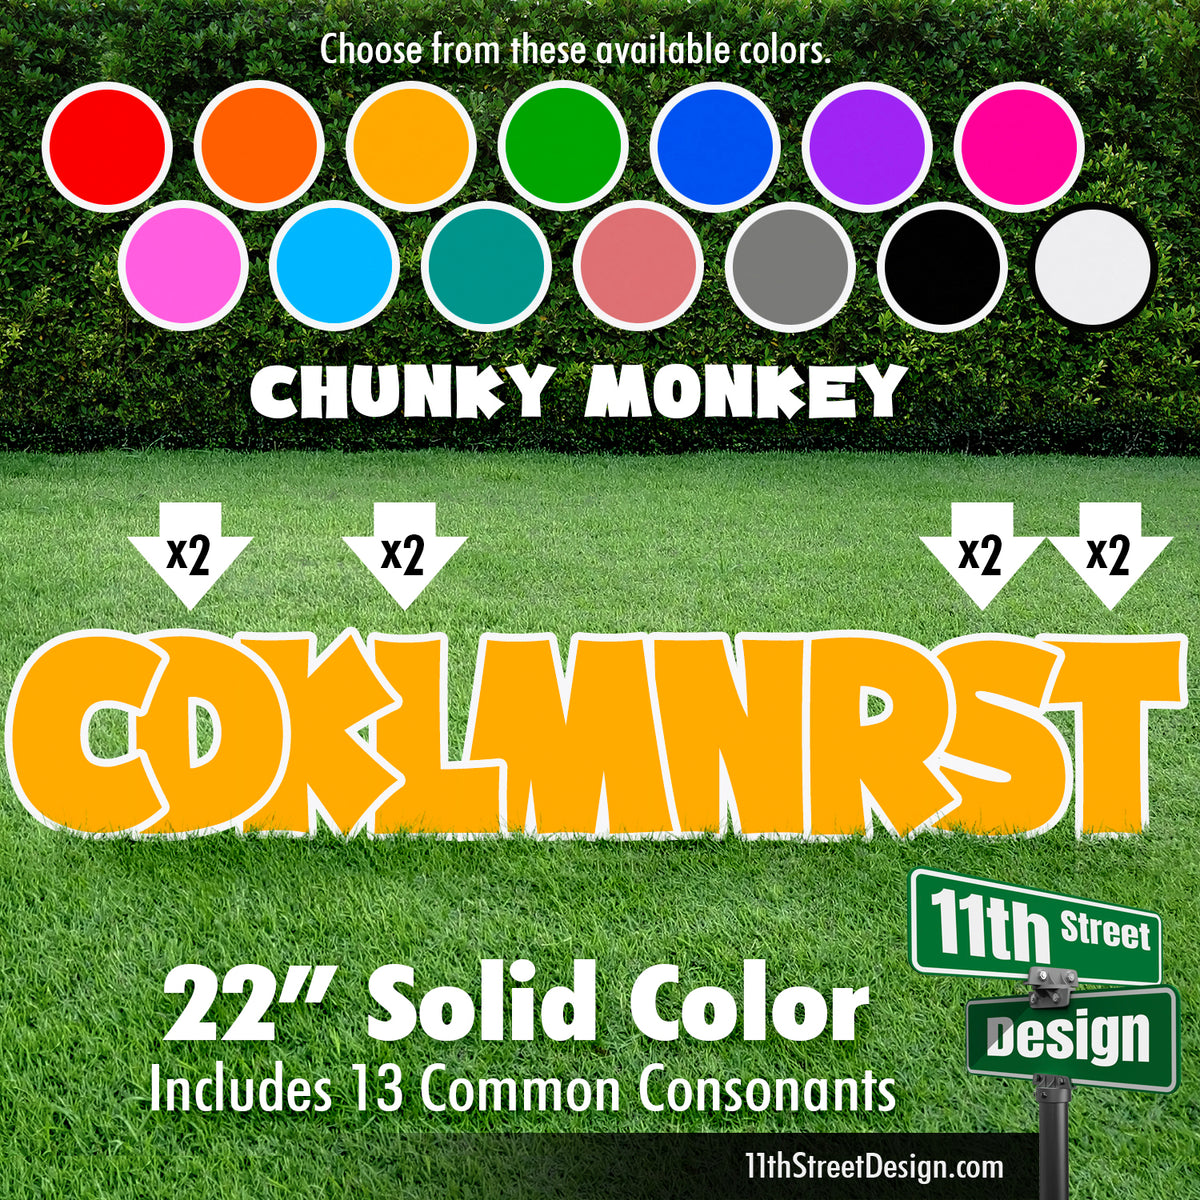 Solid Color 22&quot; Chunky Monkey Yard Card Set Includes 13 Common Consonants